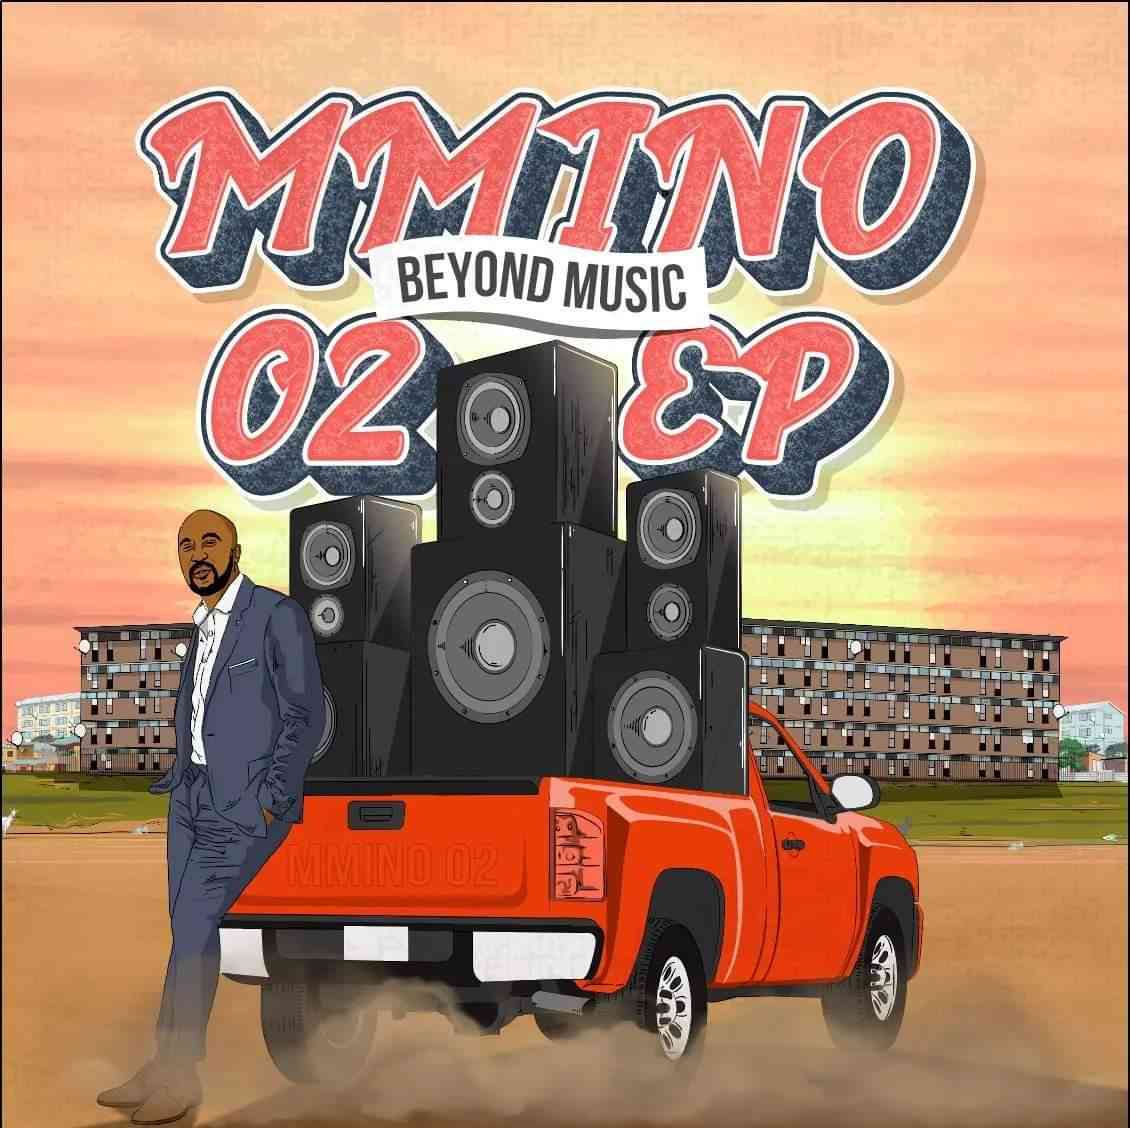 Beyond Music Ready For Mmino 2 EP, See List Of Featured Artists